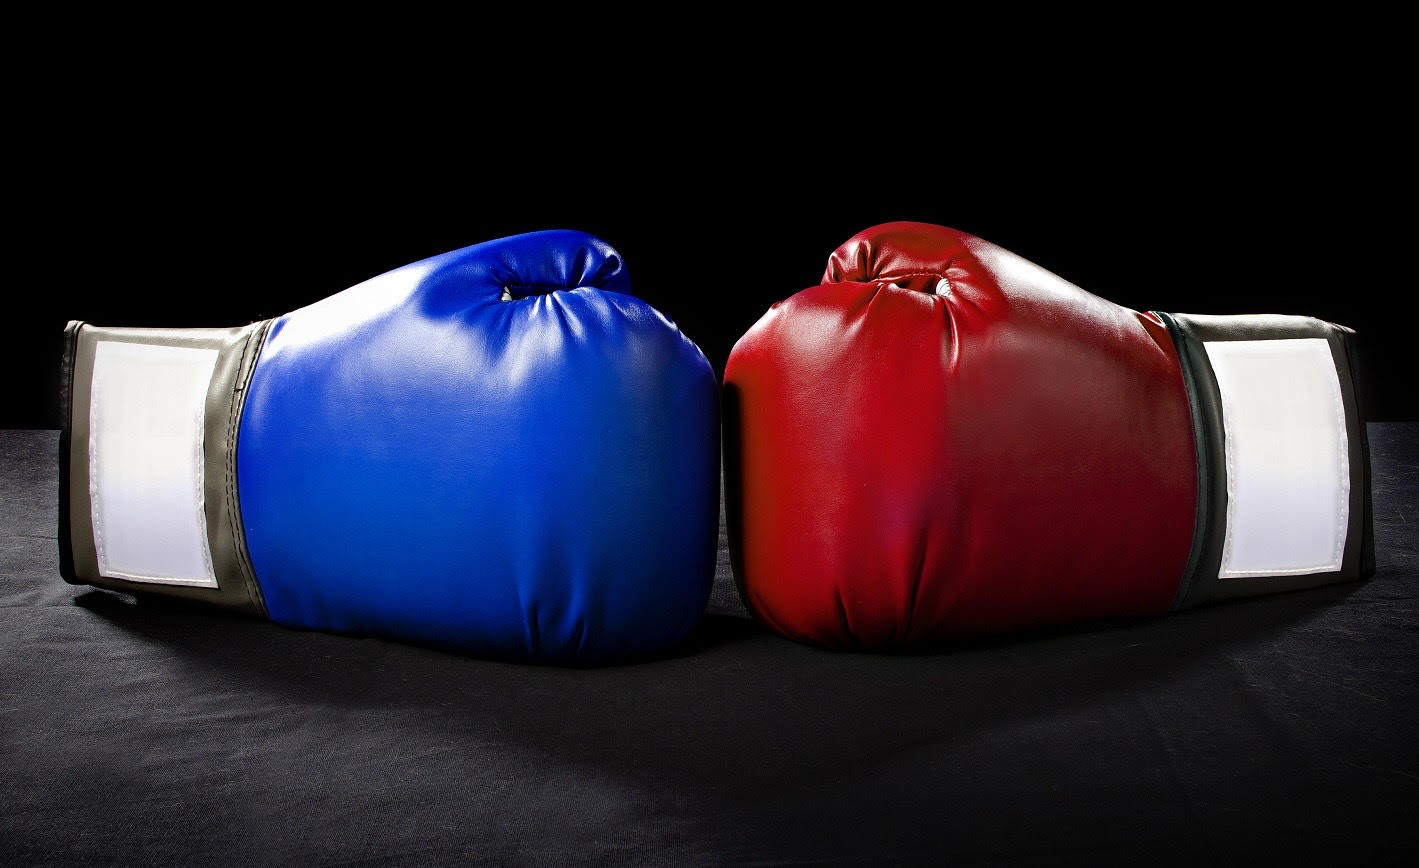 Defensive vs aggressive investor: Two boxing gloves, one blue (left) and one red (right) sit opposite one another, touching one another!